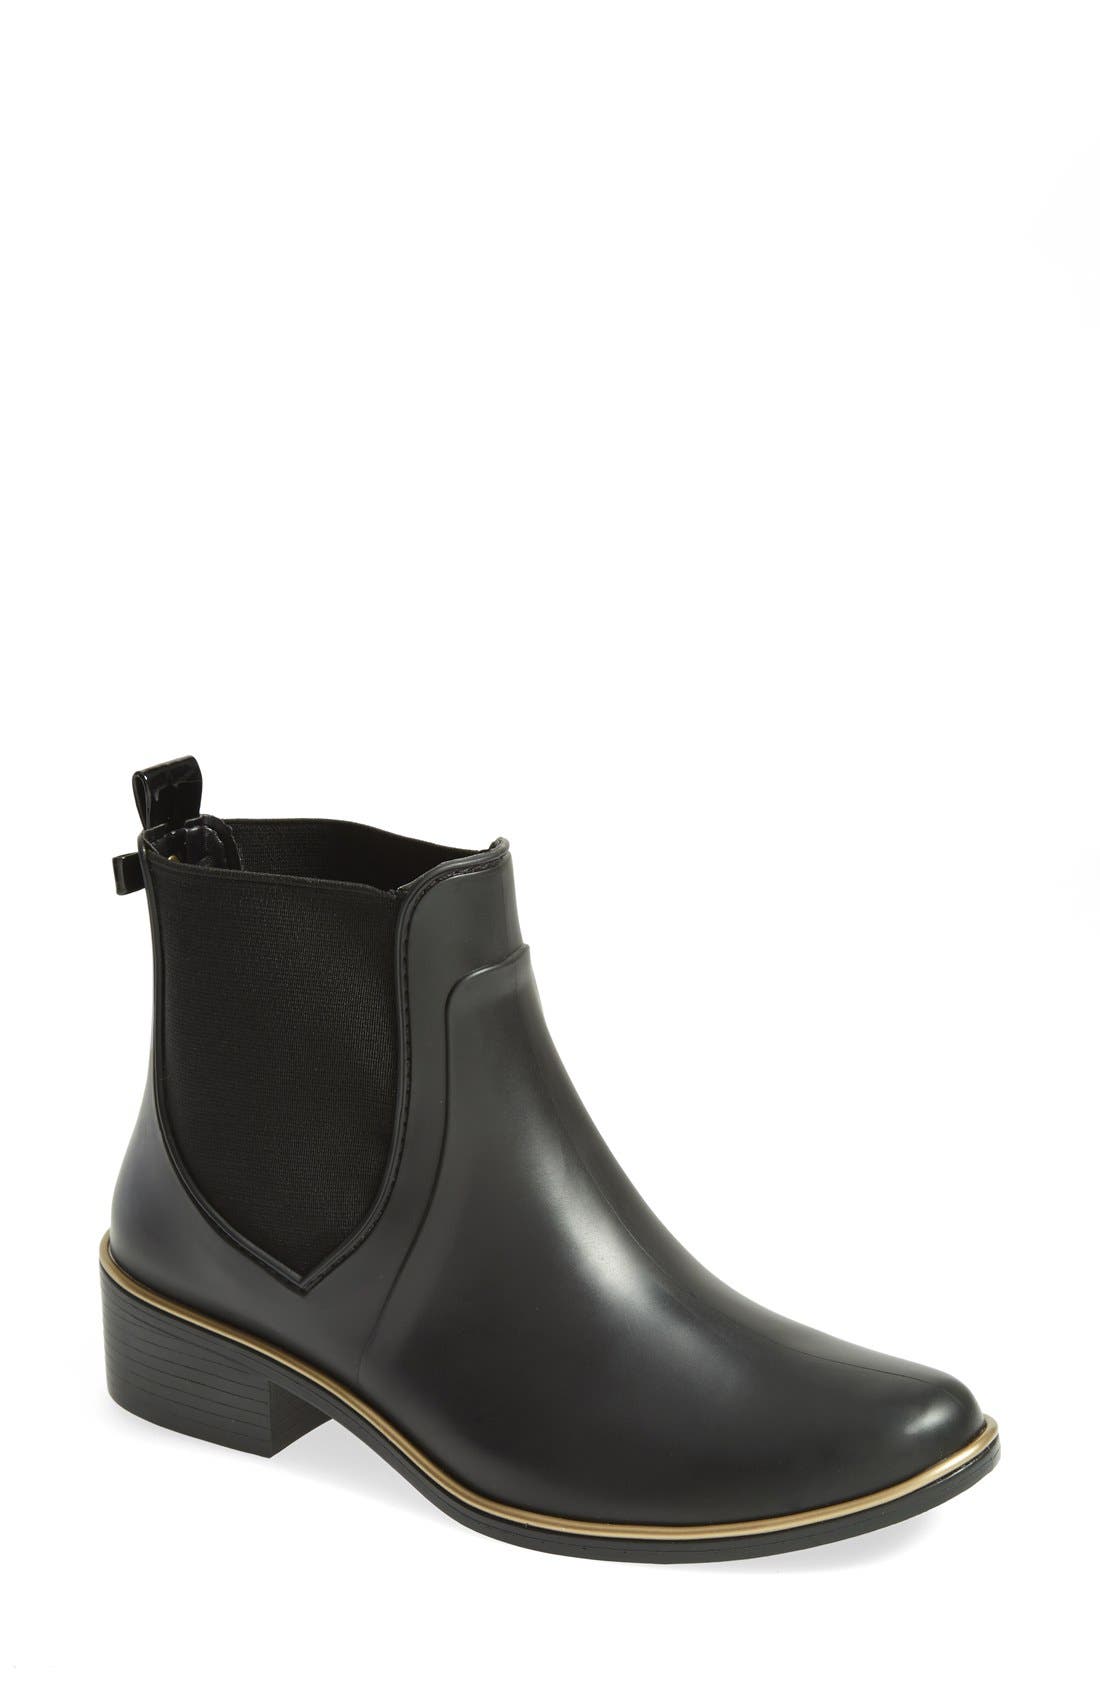 Kate Spade Sedgewick Boots Hotsell, 60% OFF 